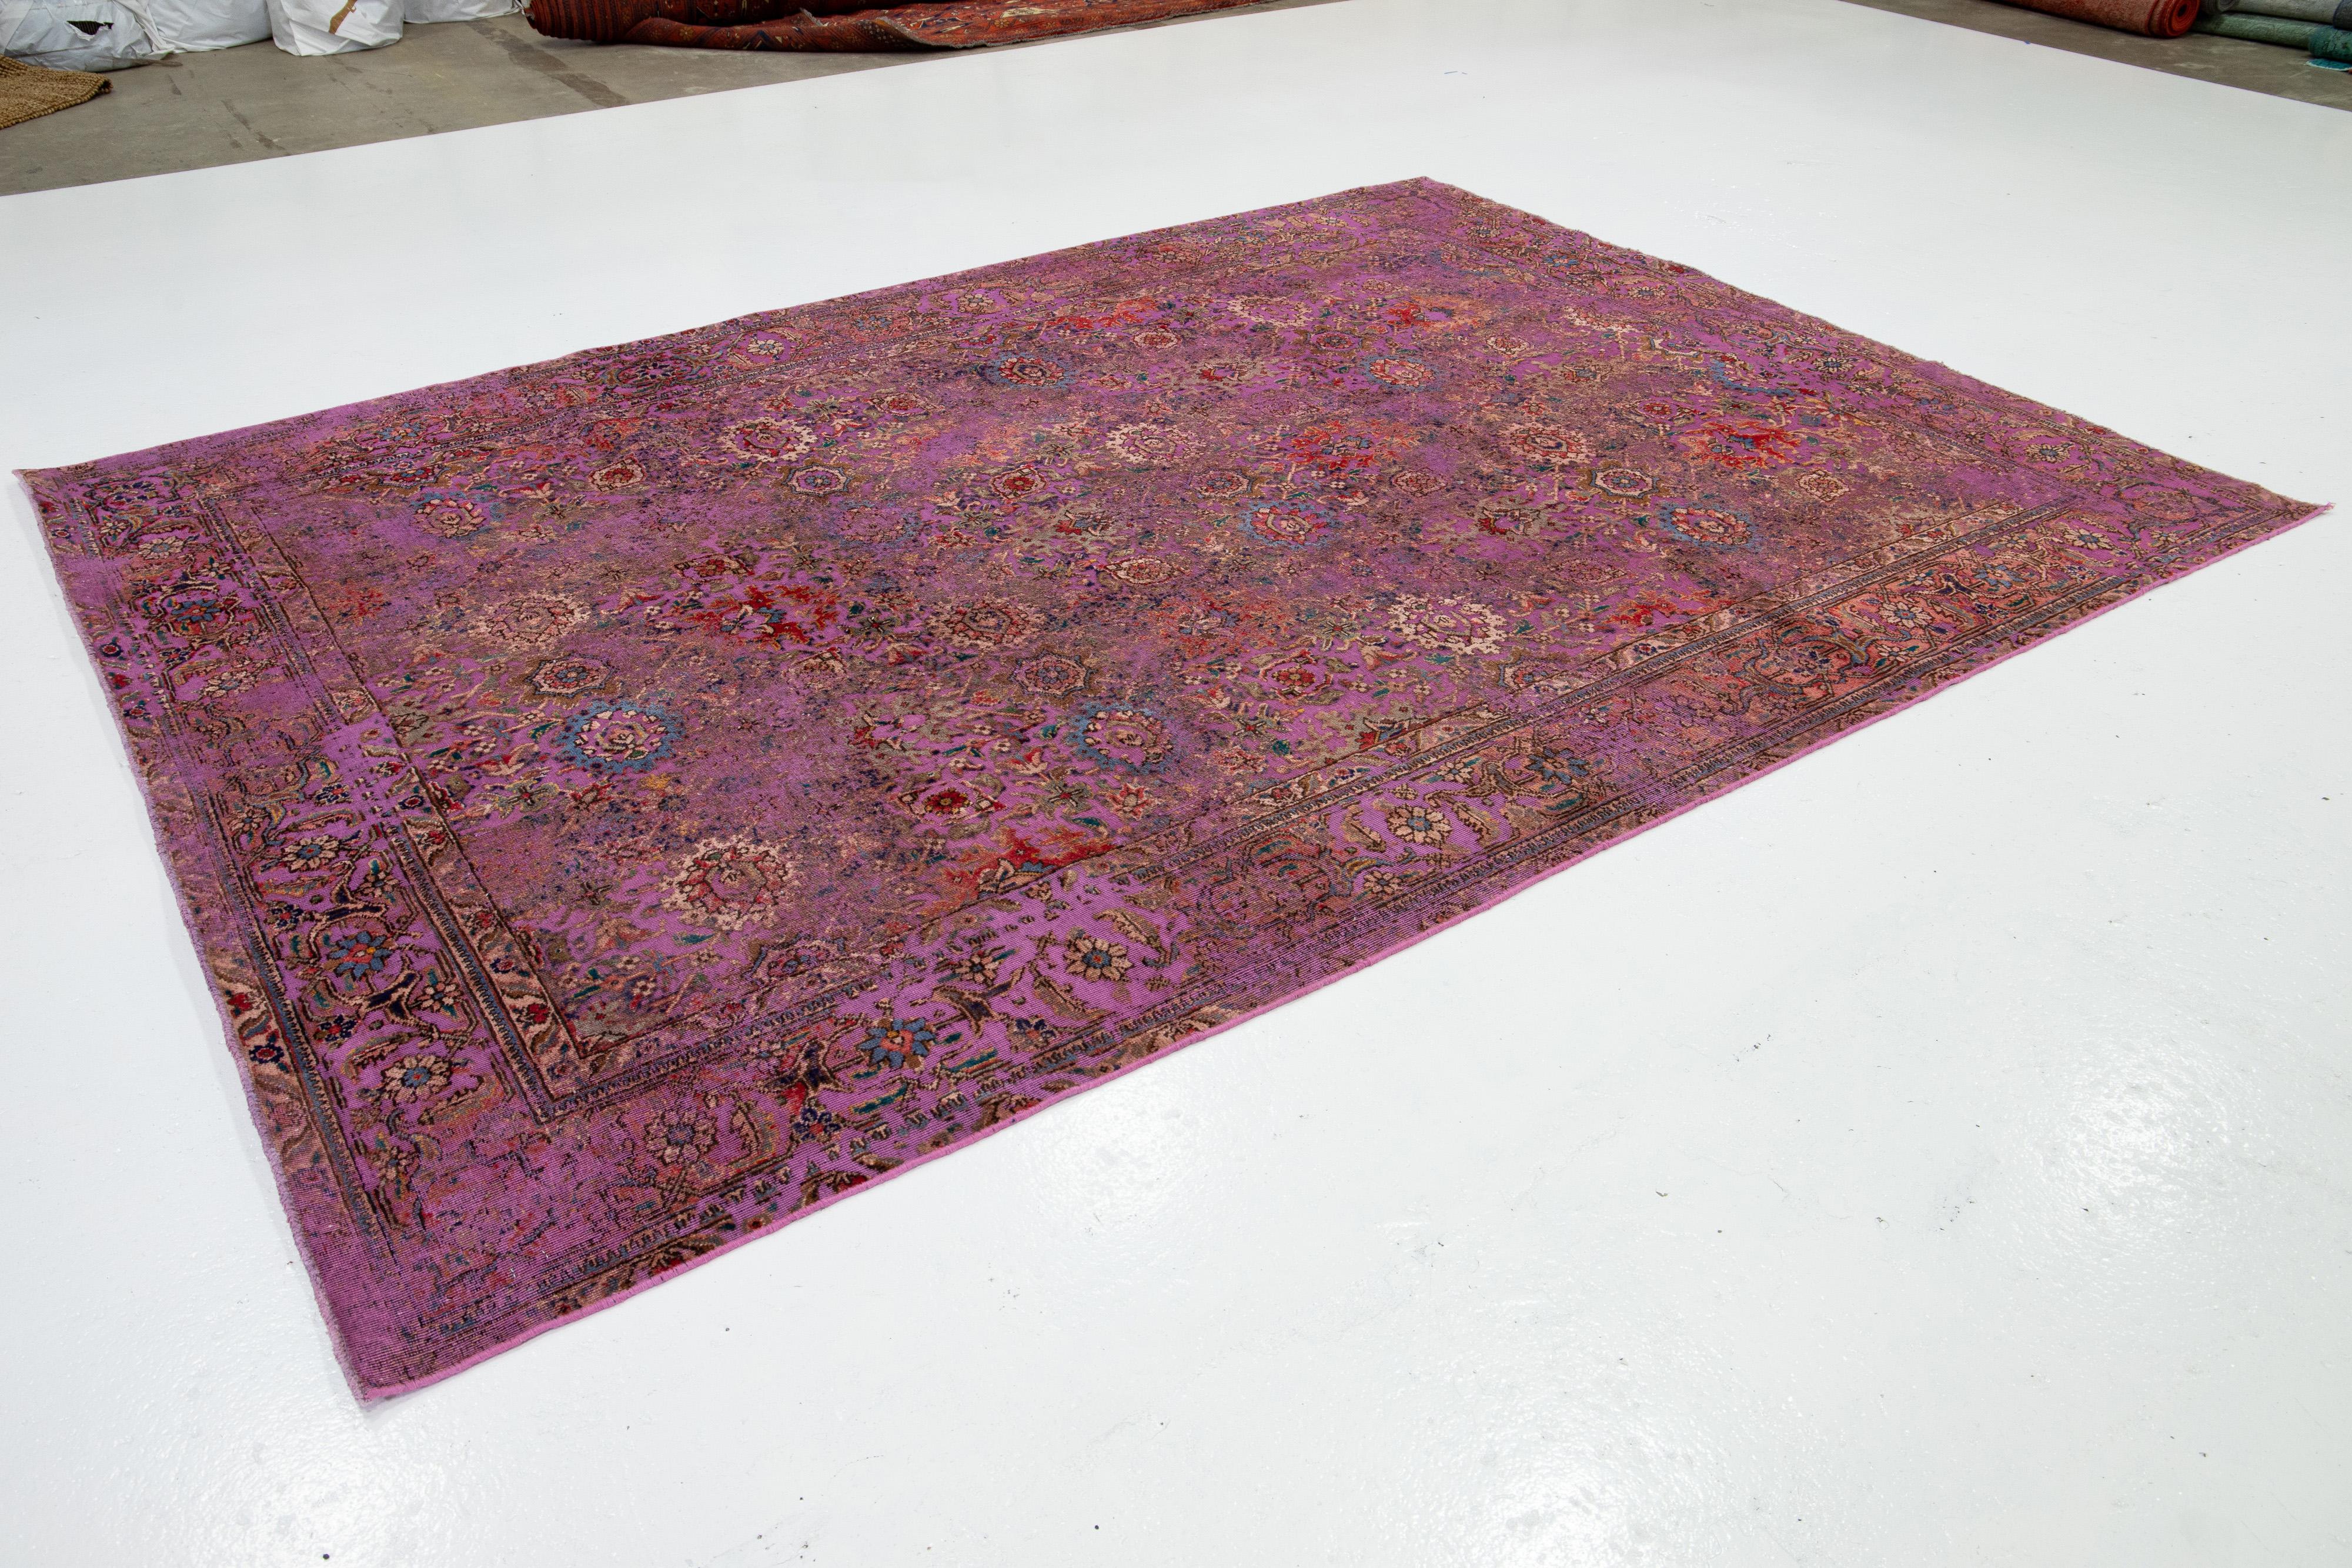 Antique Persian Overdyed Wool Rug With Floral Pattern In Purple In Good Condition For Sale In Norwalk, CT